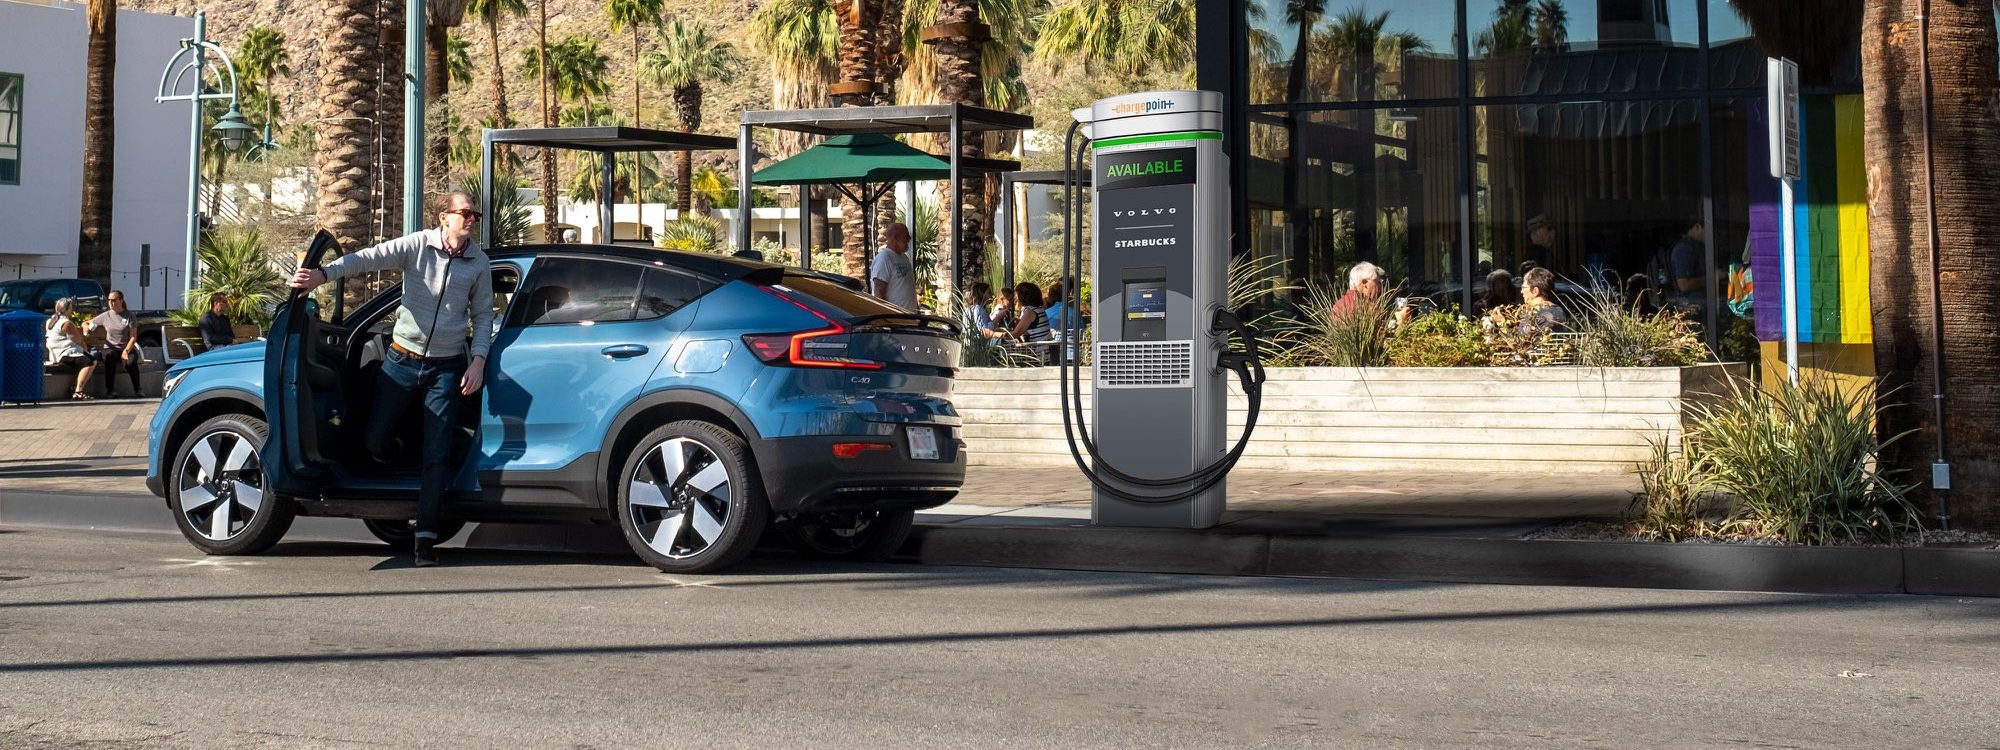 Volvo teams with Starbucks for an EV charging route in the US.